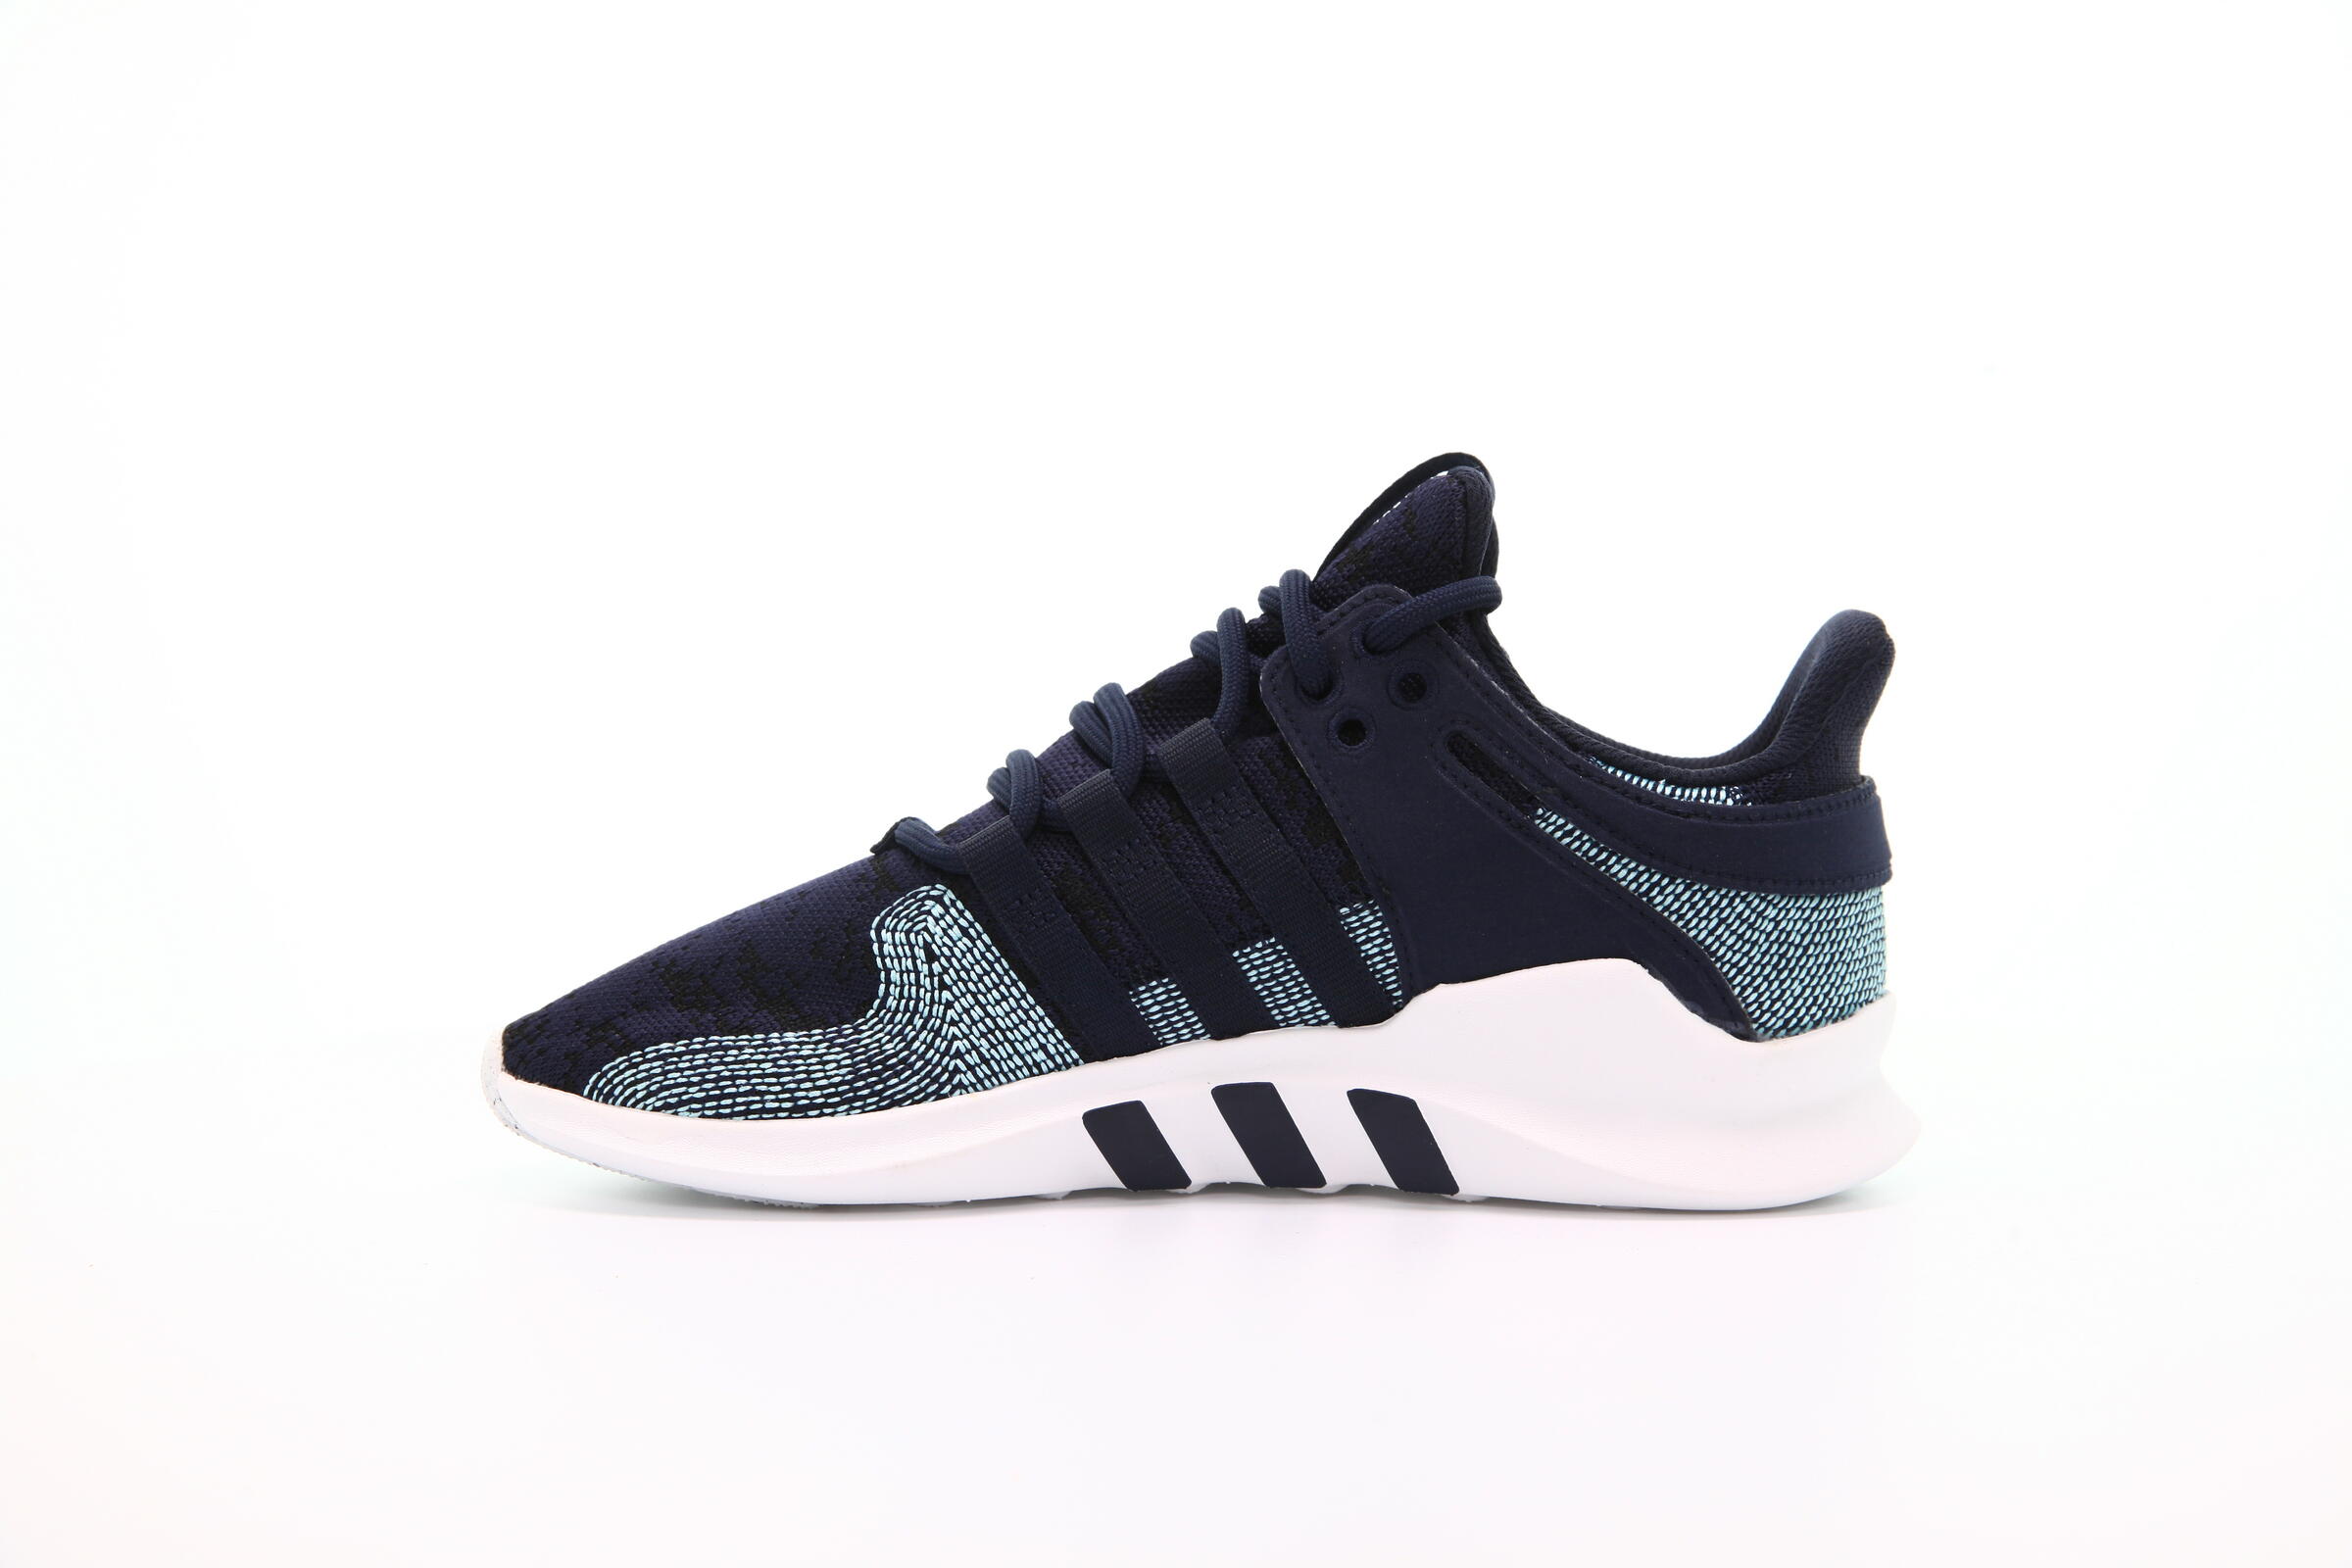 adidas Performance x Parley EQT Support Adv "Legend Ink"